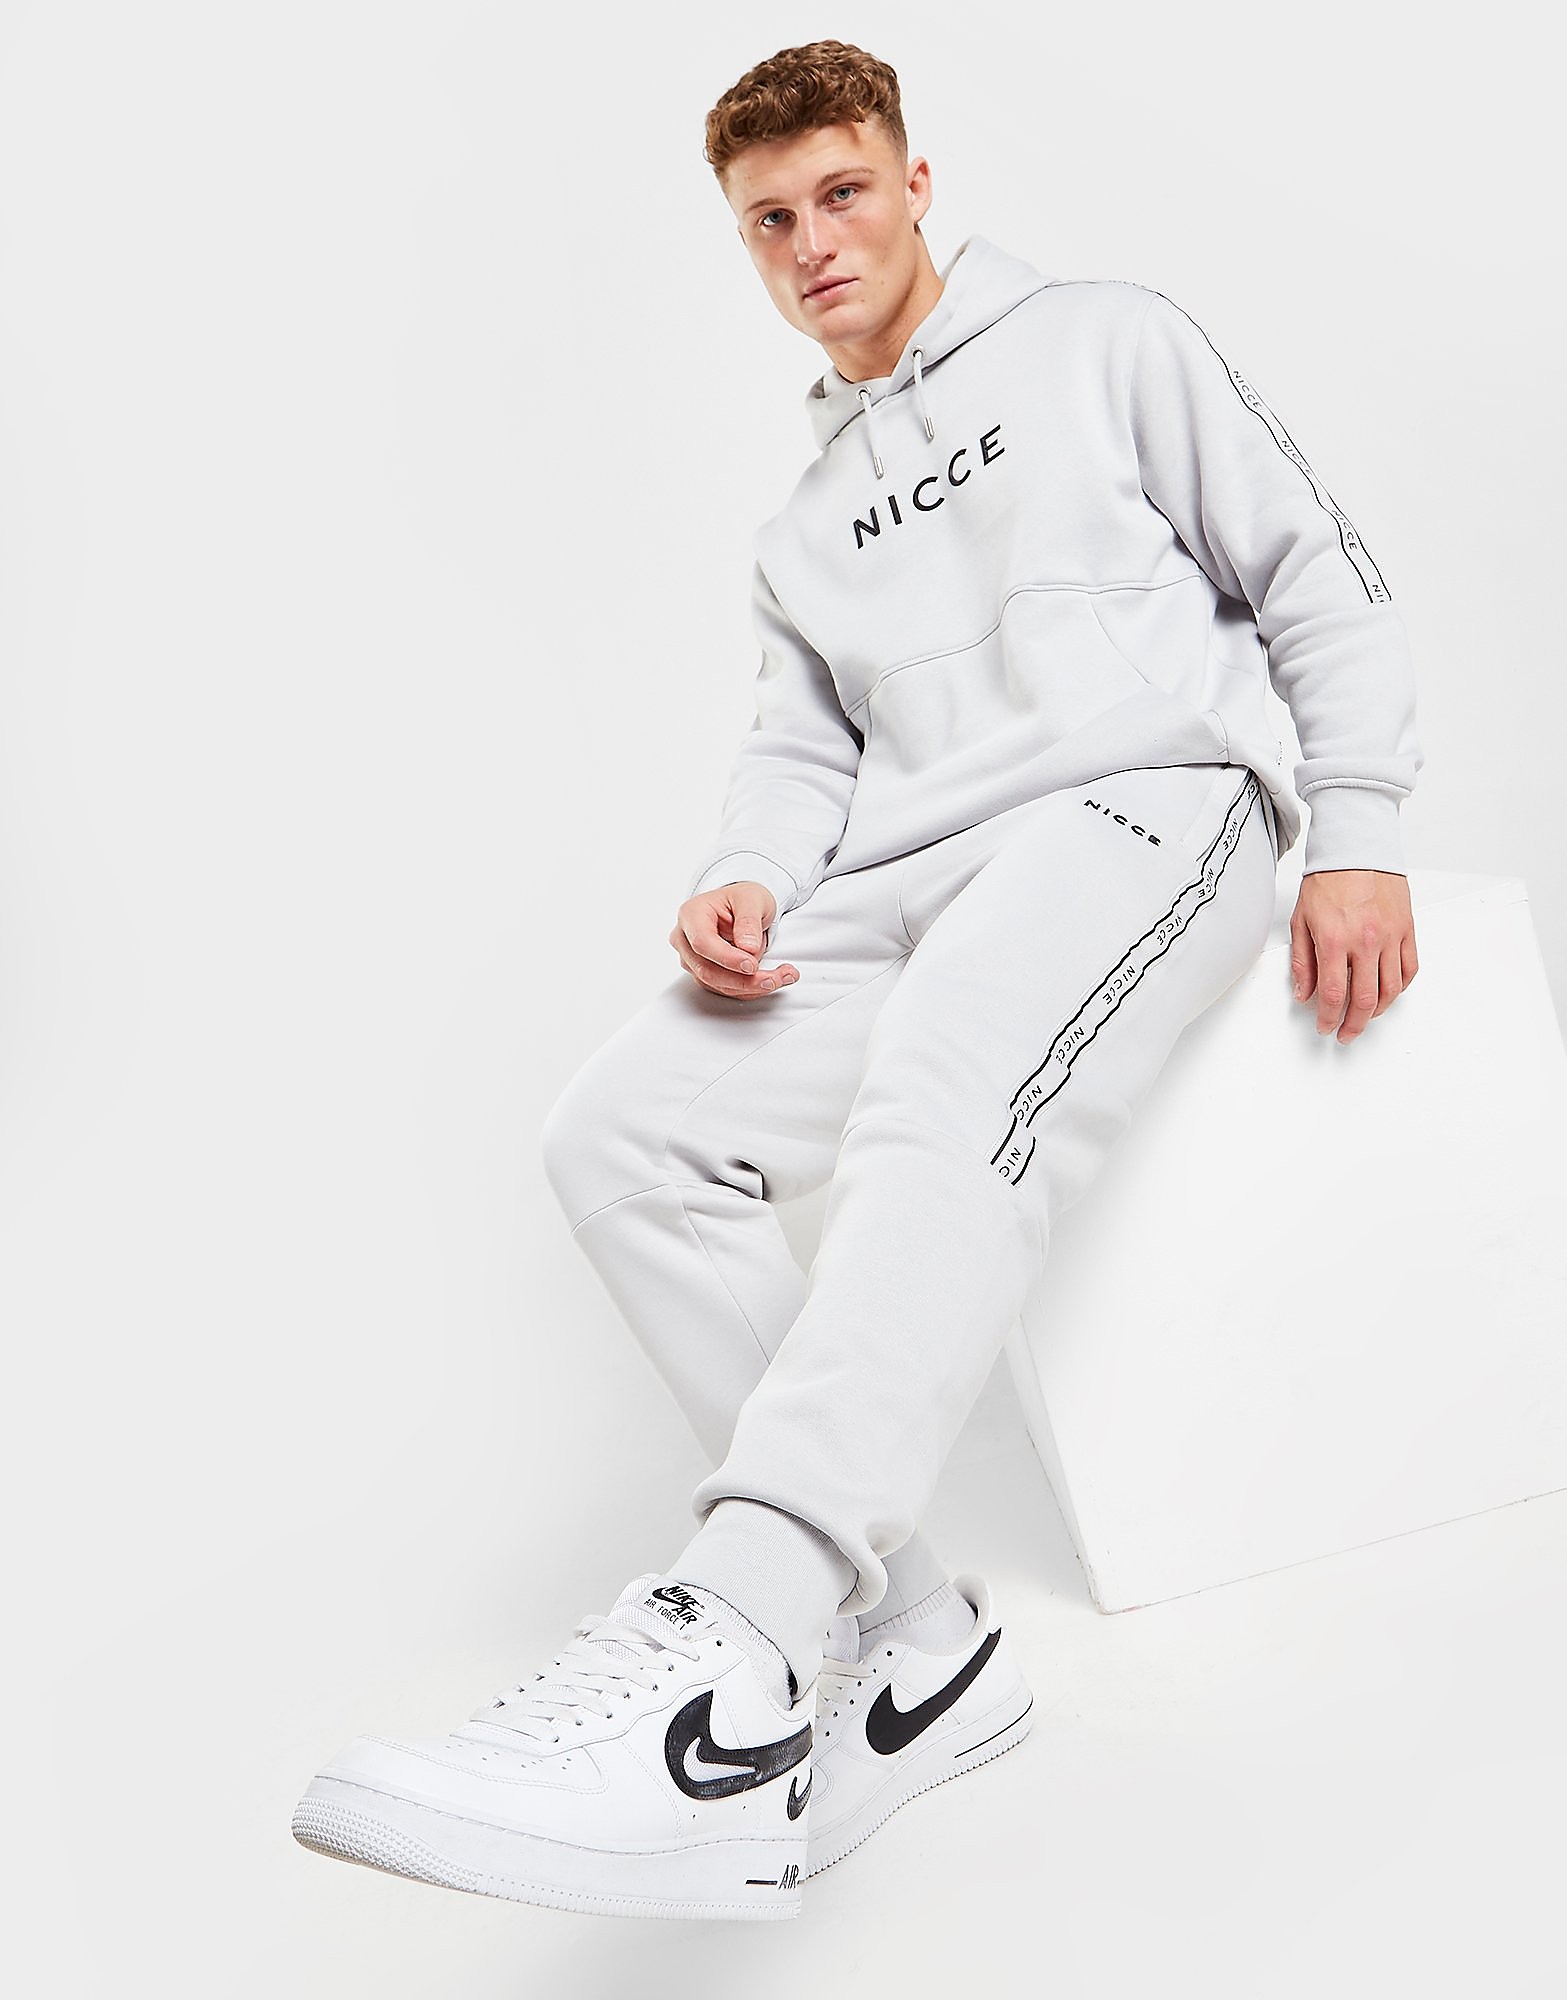 Nicce Joggers Capul Tape - Only at JD - Cinzento - Mens, Cinzento